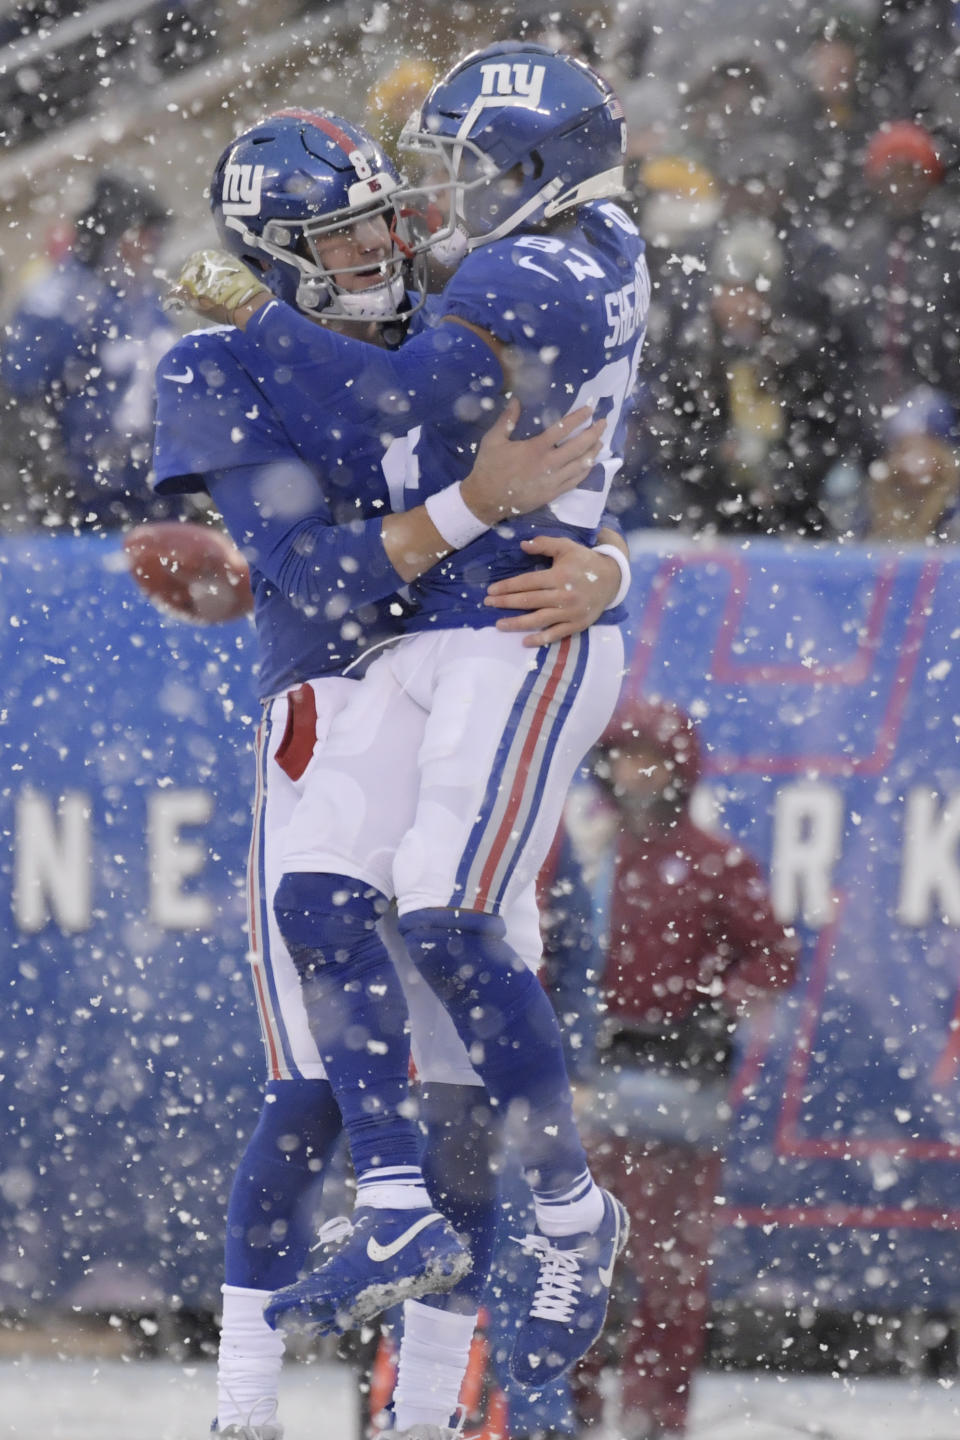 New York Giants quarterback Daniel Jones, left, celebrates with Sterling Shepard after a touchdown during the first half of an NFL football game against the Green Bay Packers, Sunday, Dec. 1, 2019, in East Rutherford, N.J. (AP Photo/Bill Kostroun)